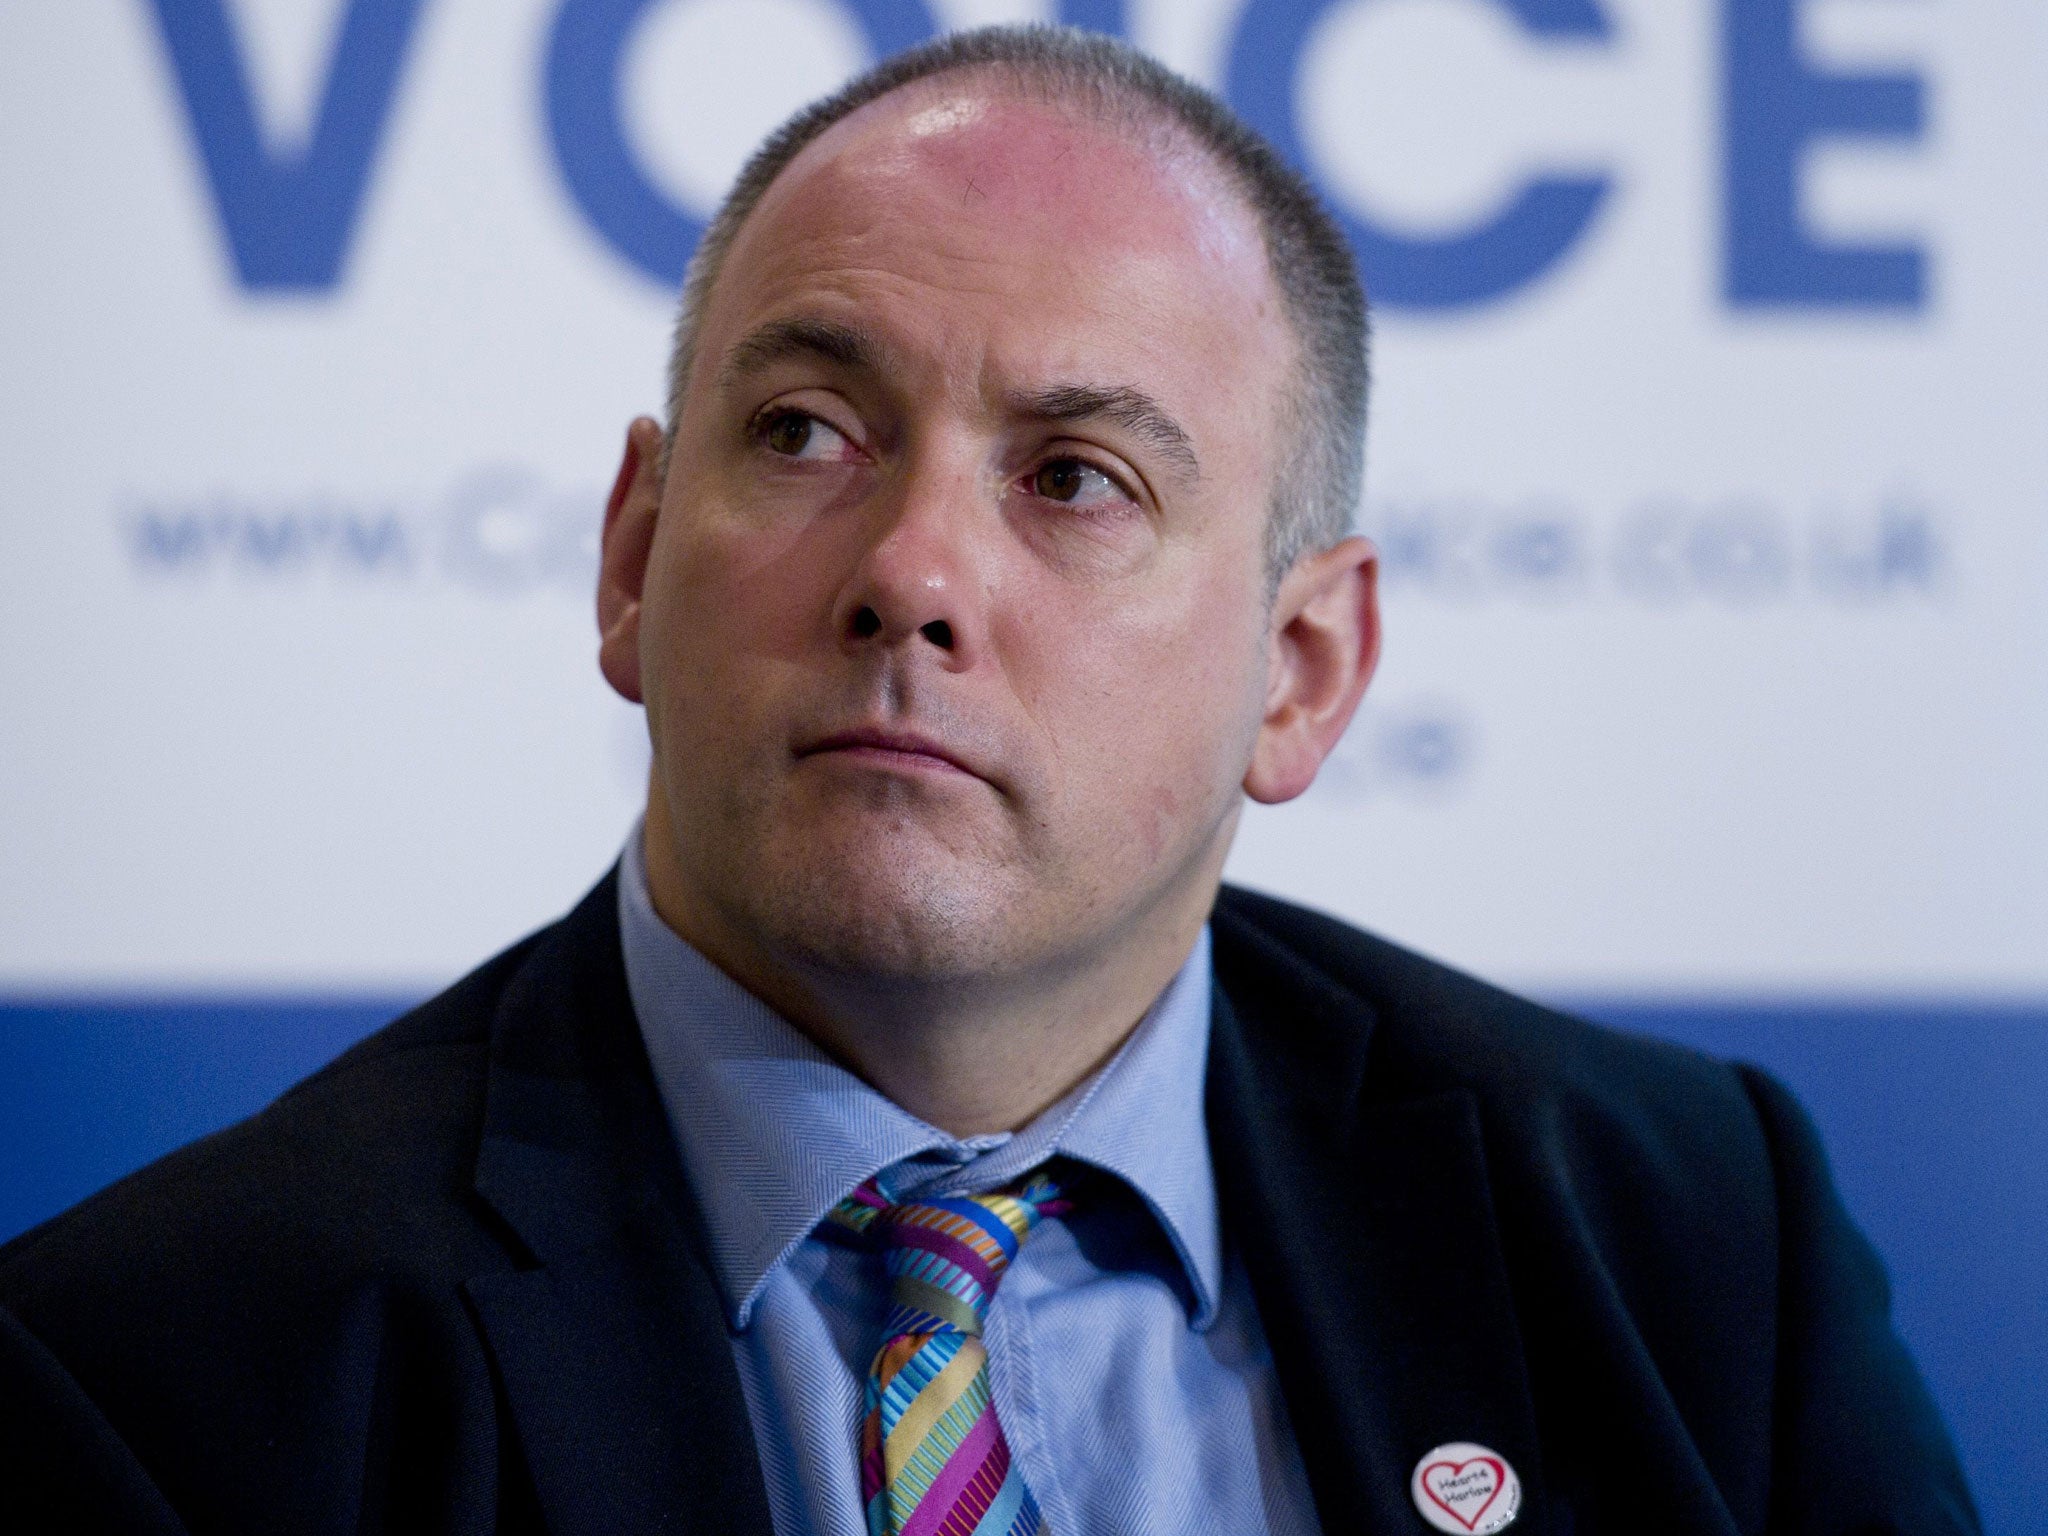 Robert Halfon has called for an end to the obsession with academic degrees